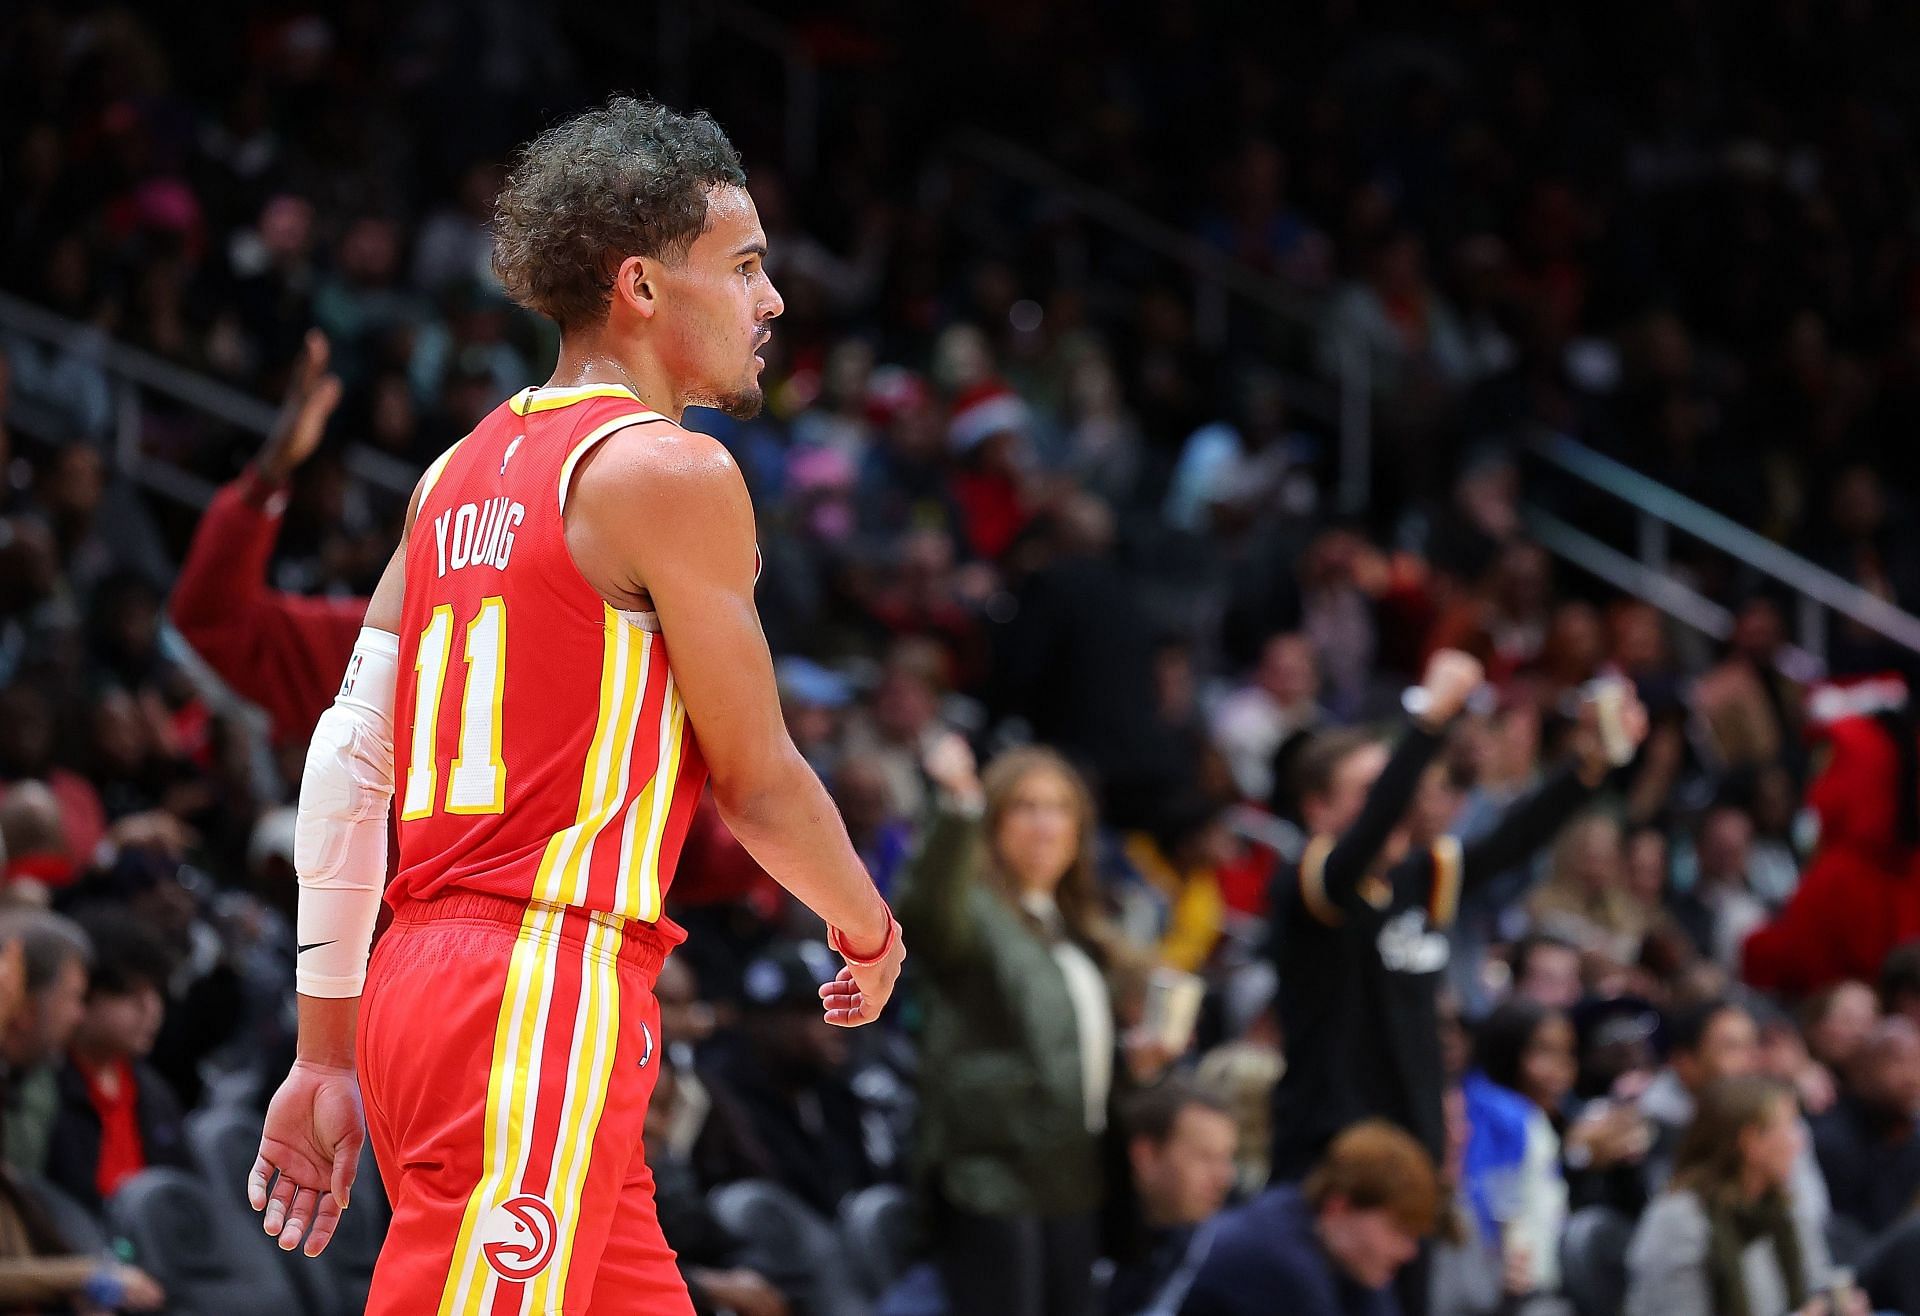 Trae Young will lead the Atlanta Hawks against the depleted Golden State Warriors.